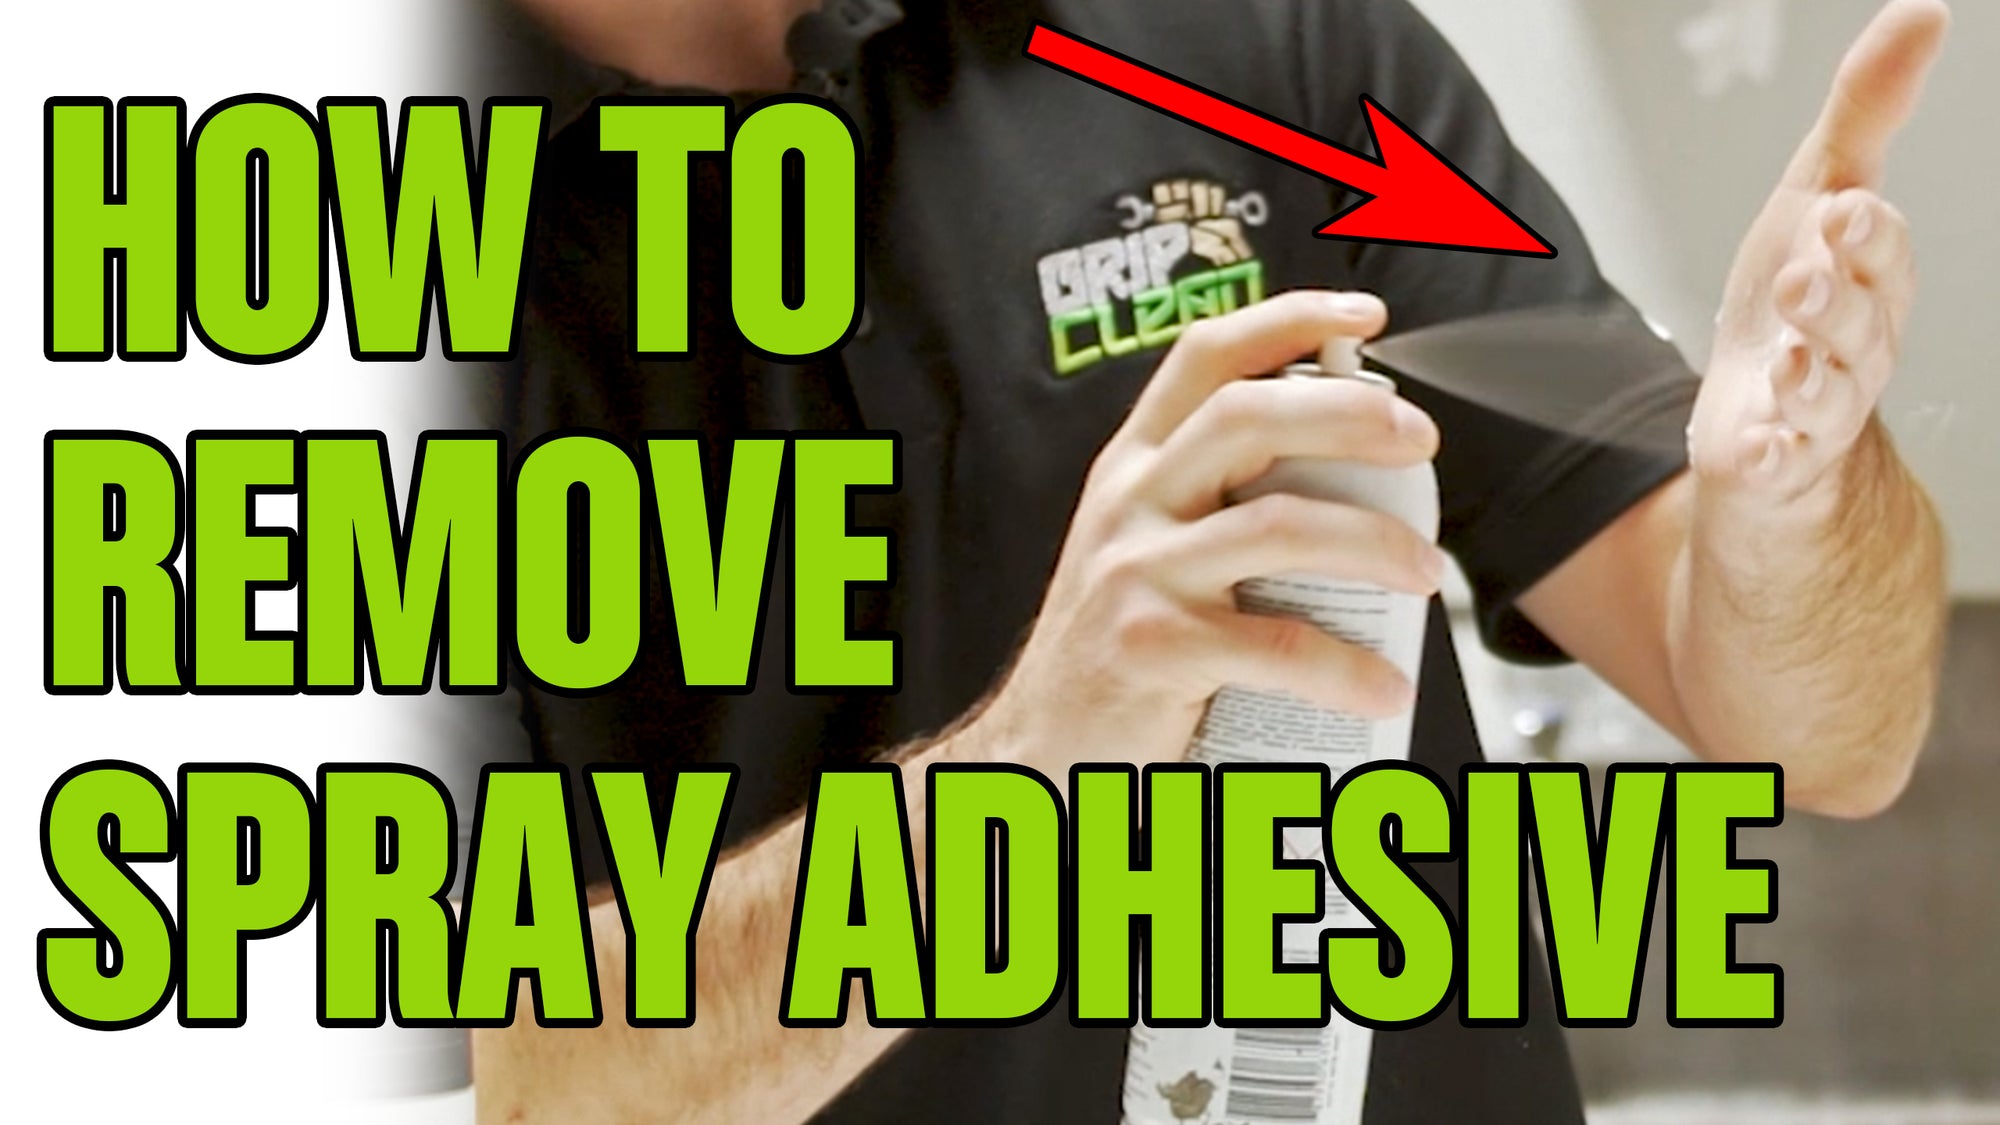 Spray Adhesive Remover & How To Remove Adhesive From Skin